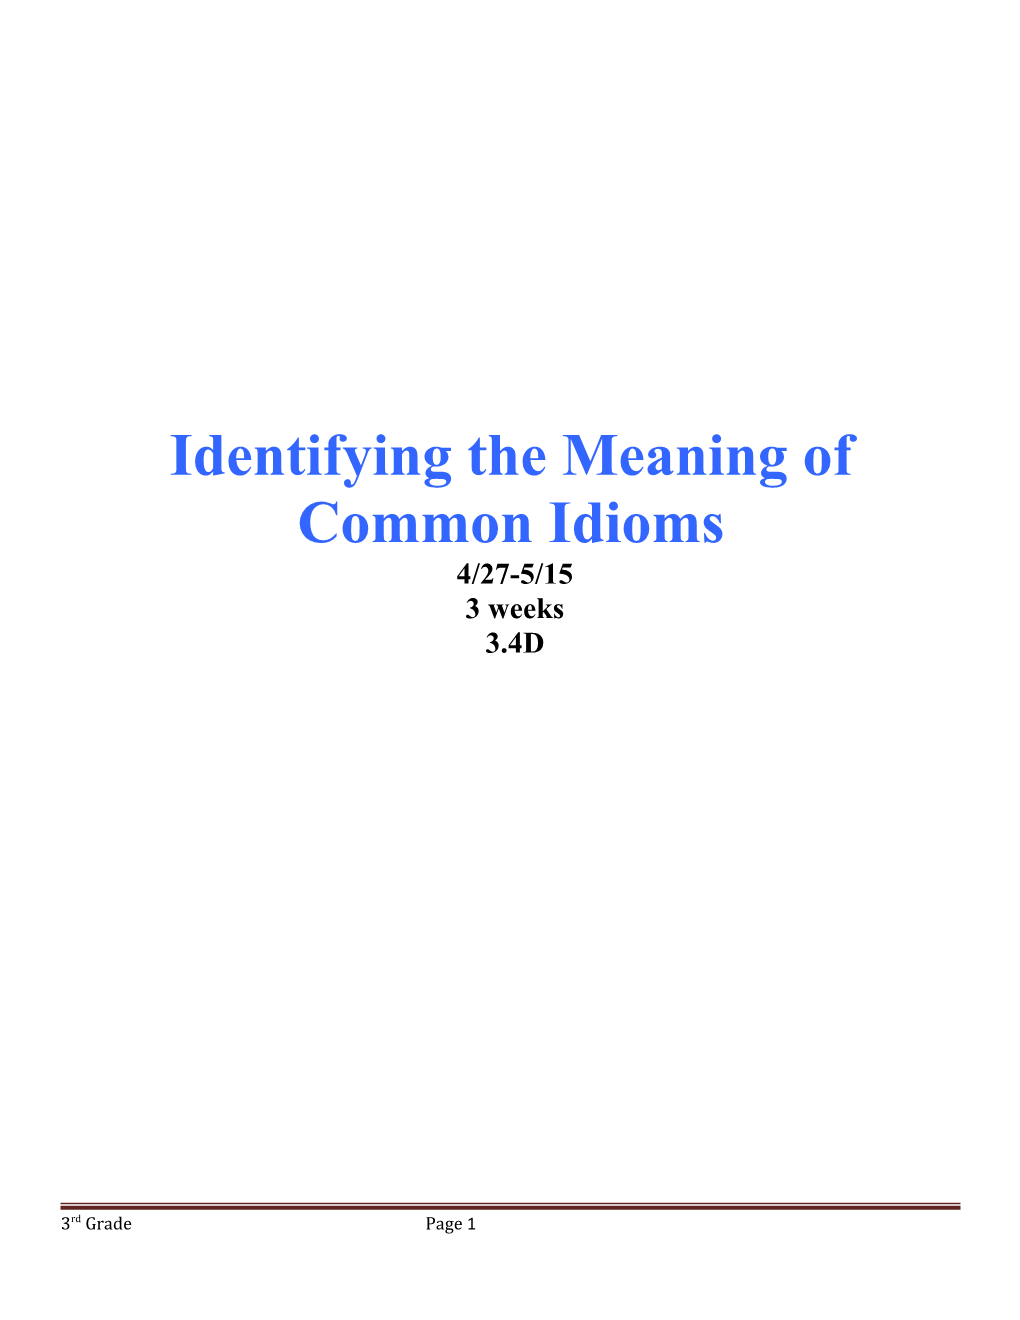 Identifying the Meaning of Common Idioms